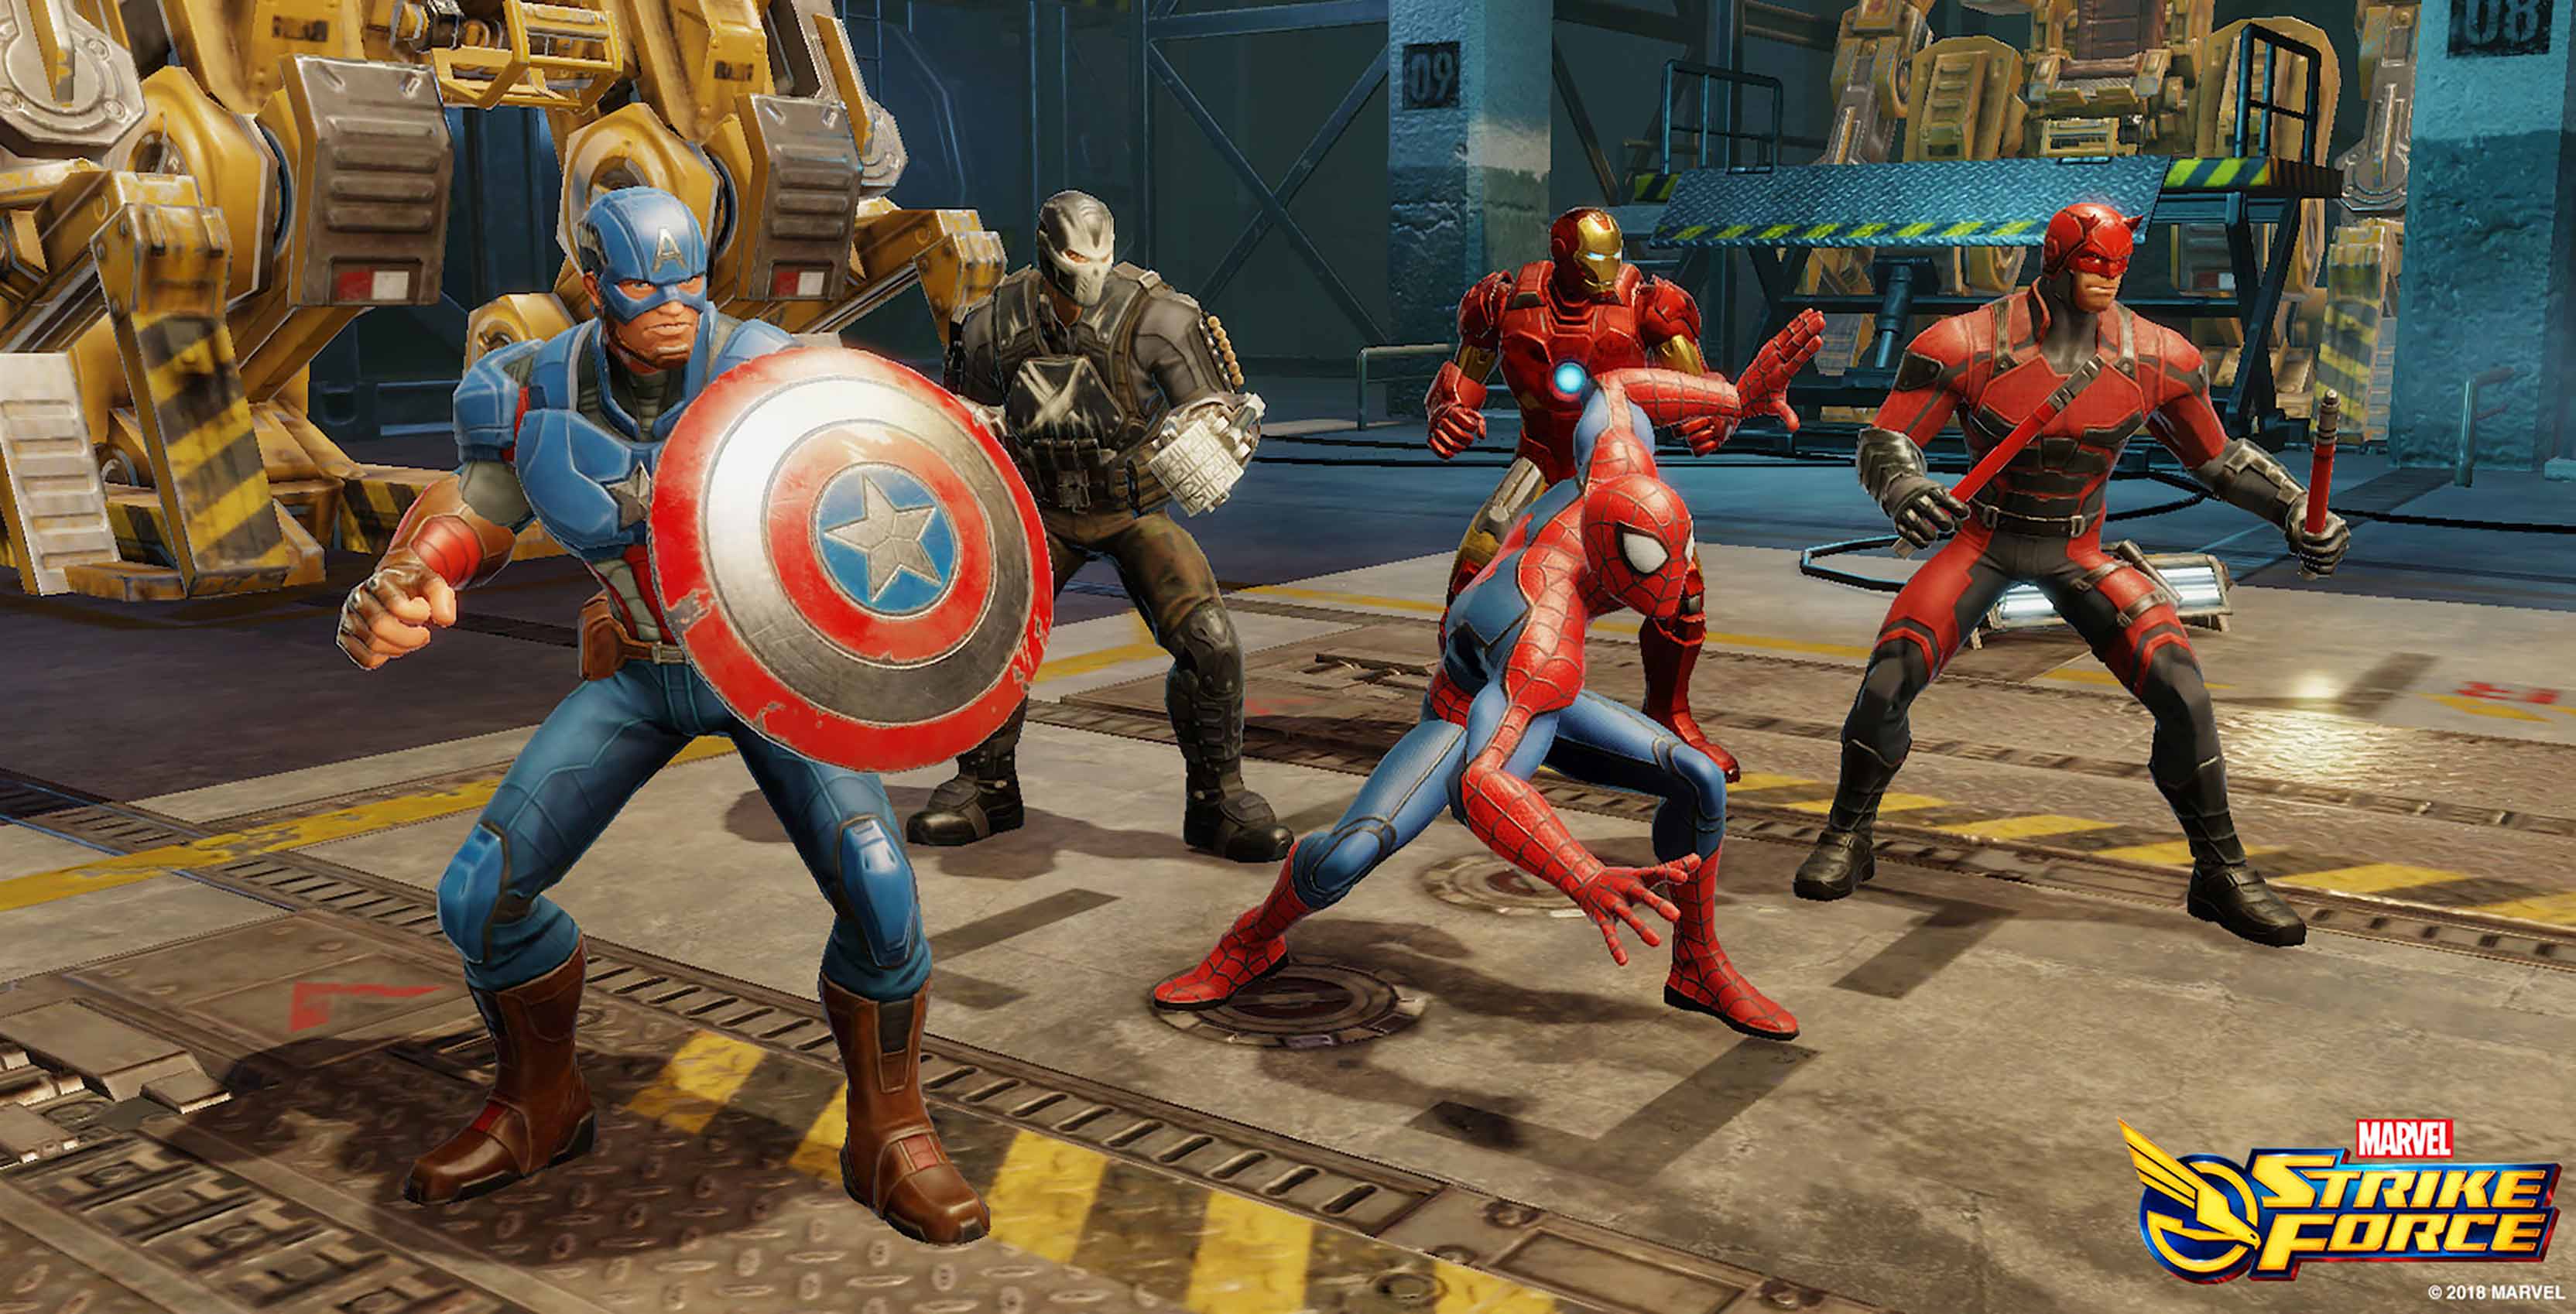 Marvel Strike Force characters